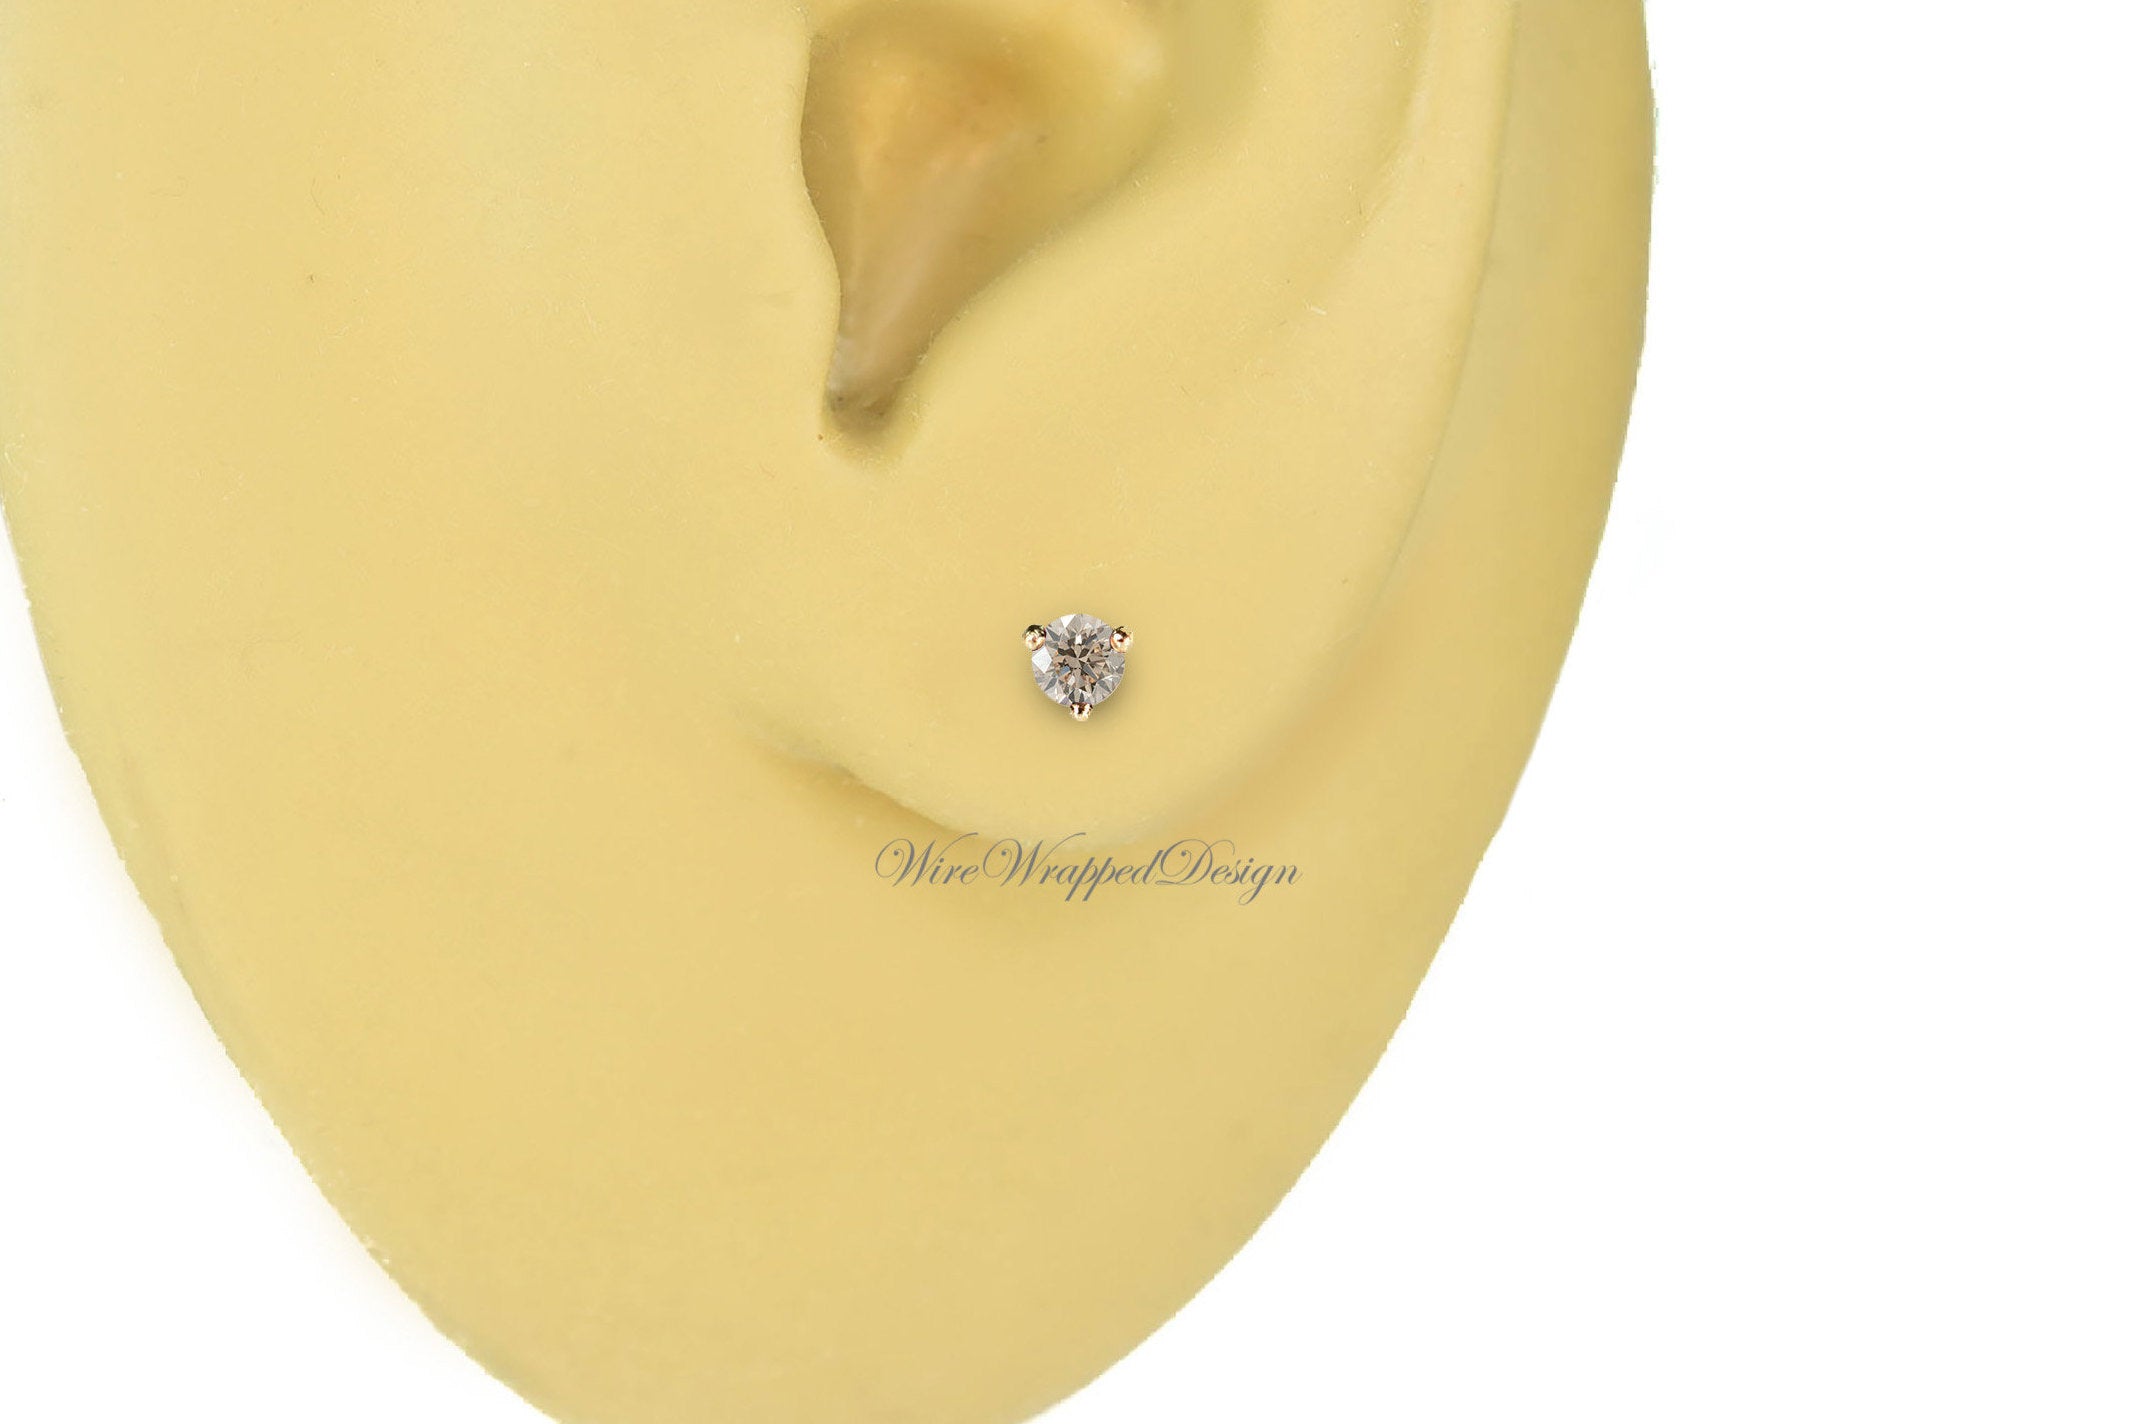 PAIR Genuine Top Light BROWN DIAMOND Earrings Studs 2.5mm 0.12tcw Martini 14k Solid Gold (Yellow, Rose, White) Platinum Silver Cartilage